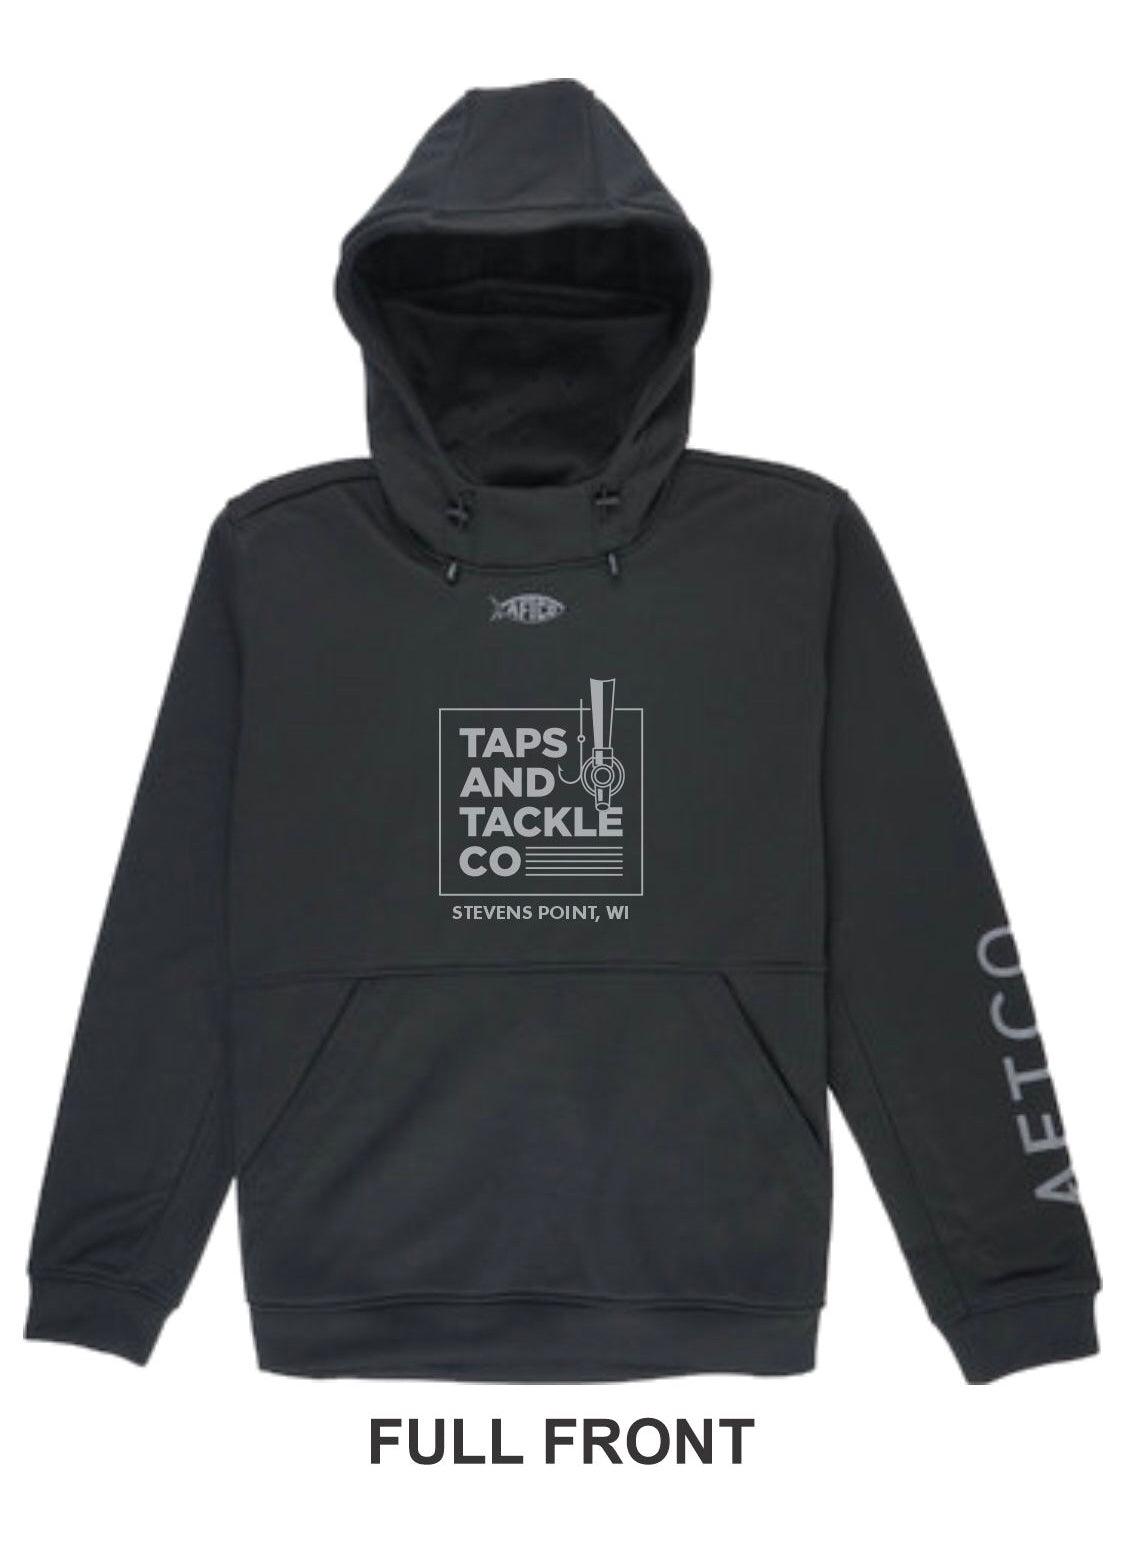 AFTCO Reaper Hoodie – Taps and Tackle Co.